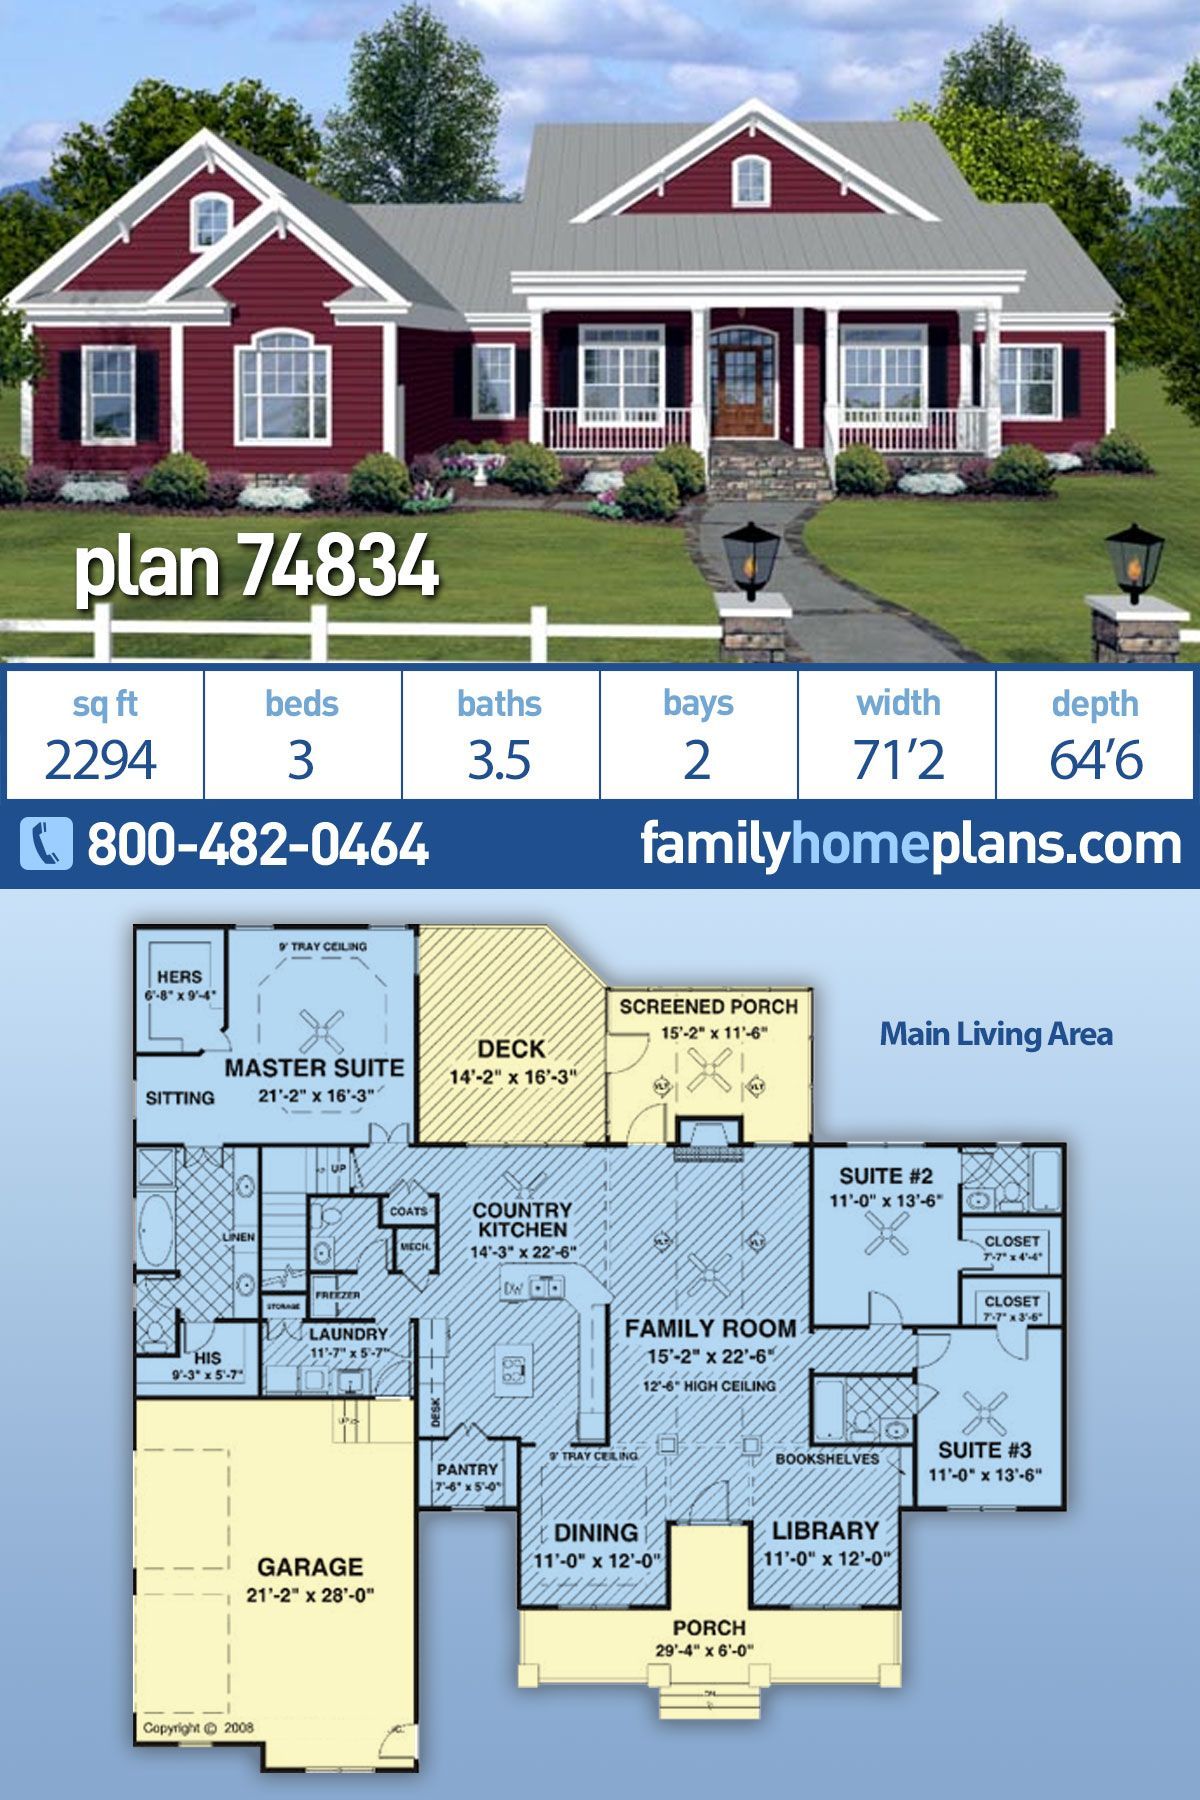 Plan 74834 Country Home Plan, 2294 sq. ft., 3 Bedrooms, 3